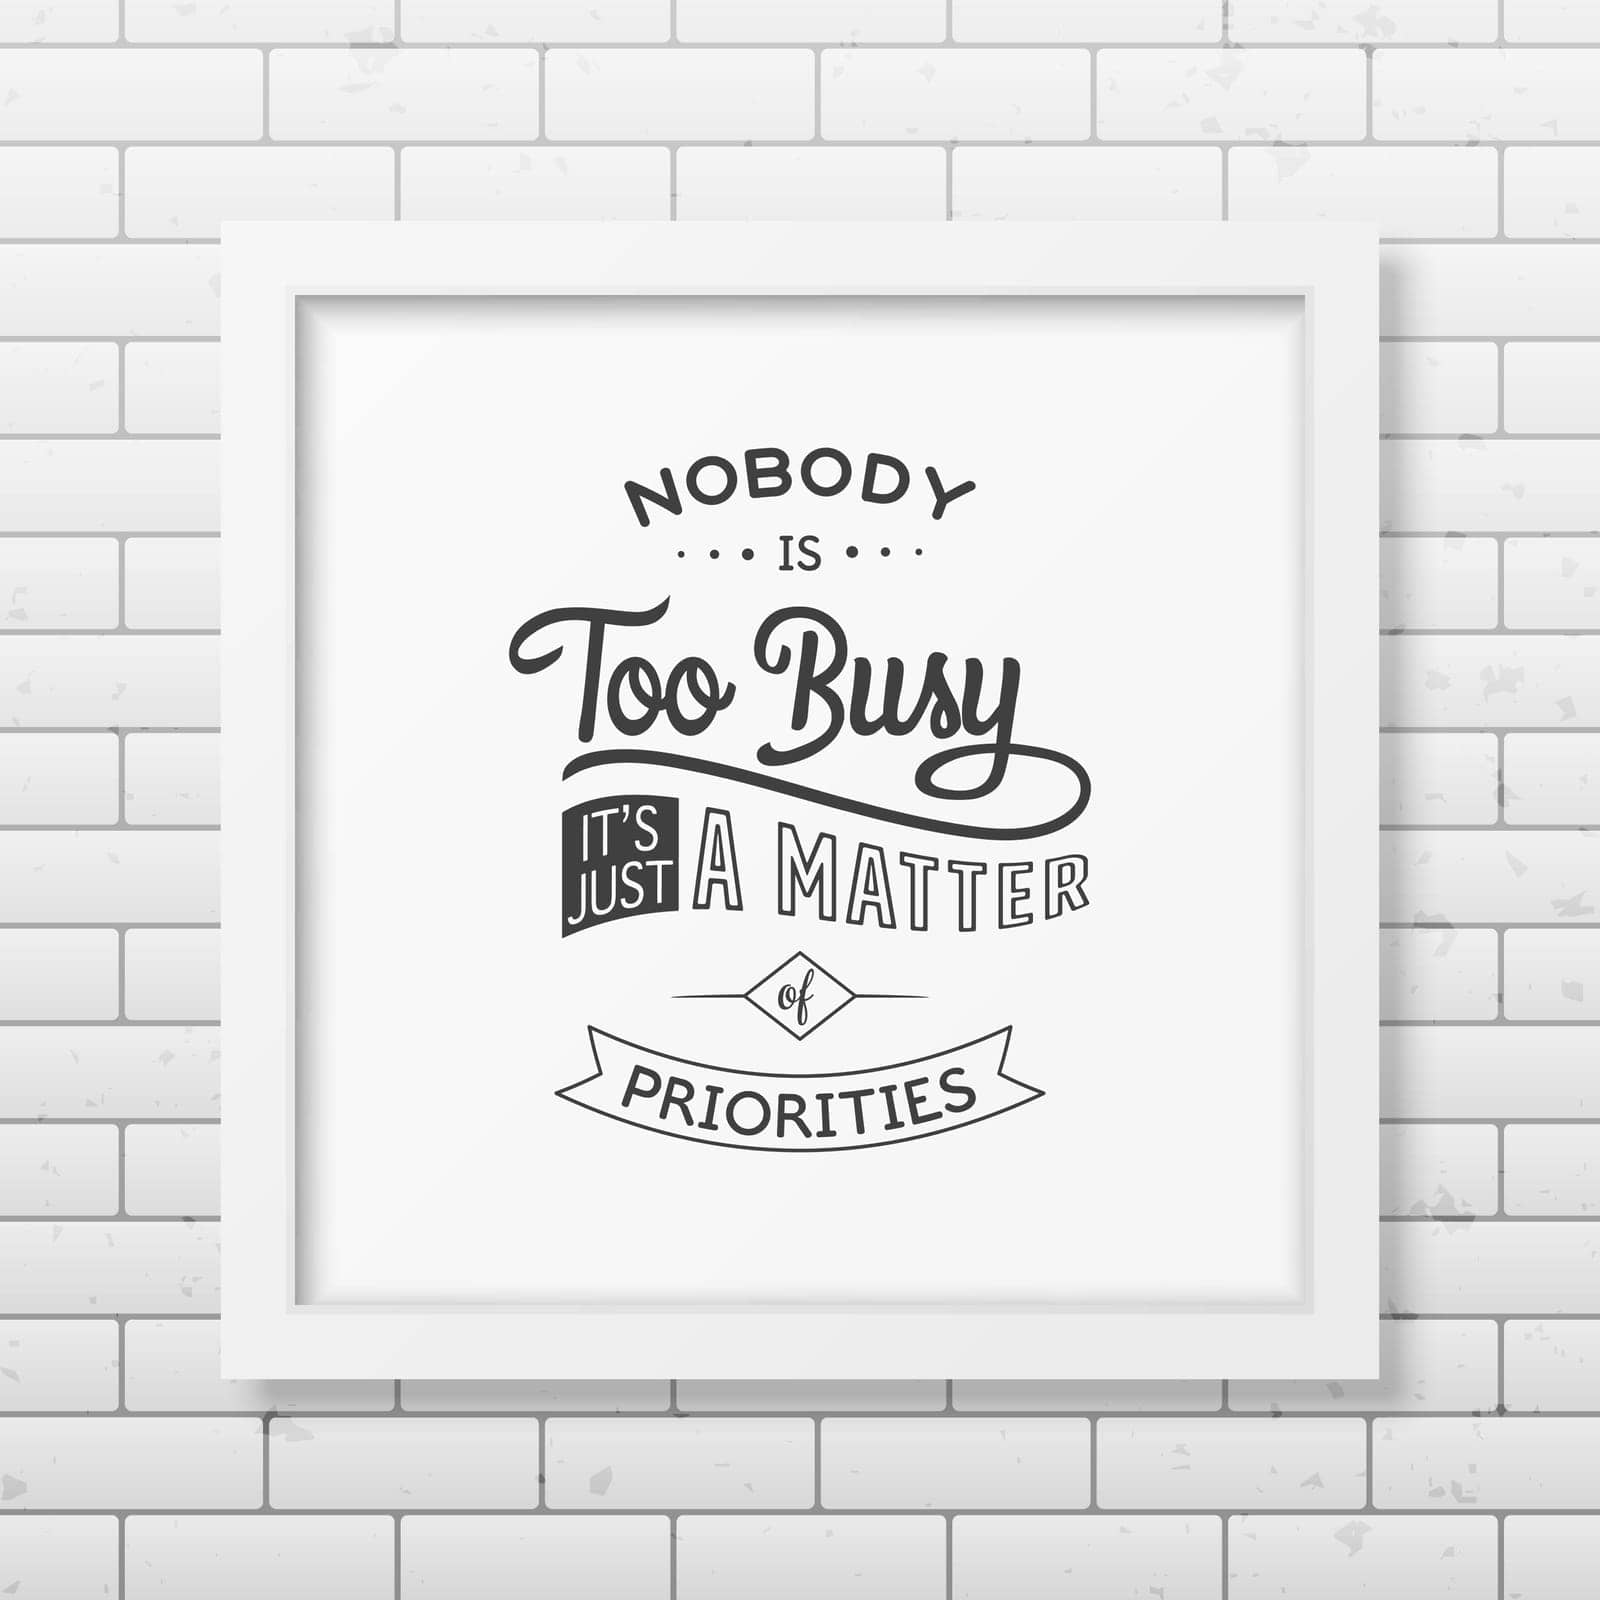 Nobody is too busy, it is just a matter of priorities - Quote typographical background in the realistic square white frame on the brick wall background. Vector EPS10 illustration.